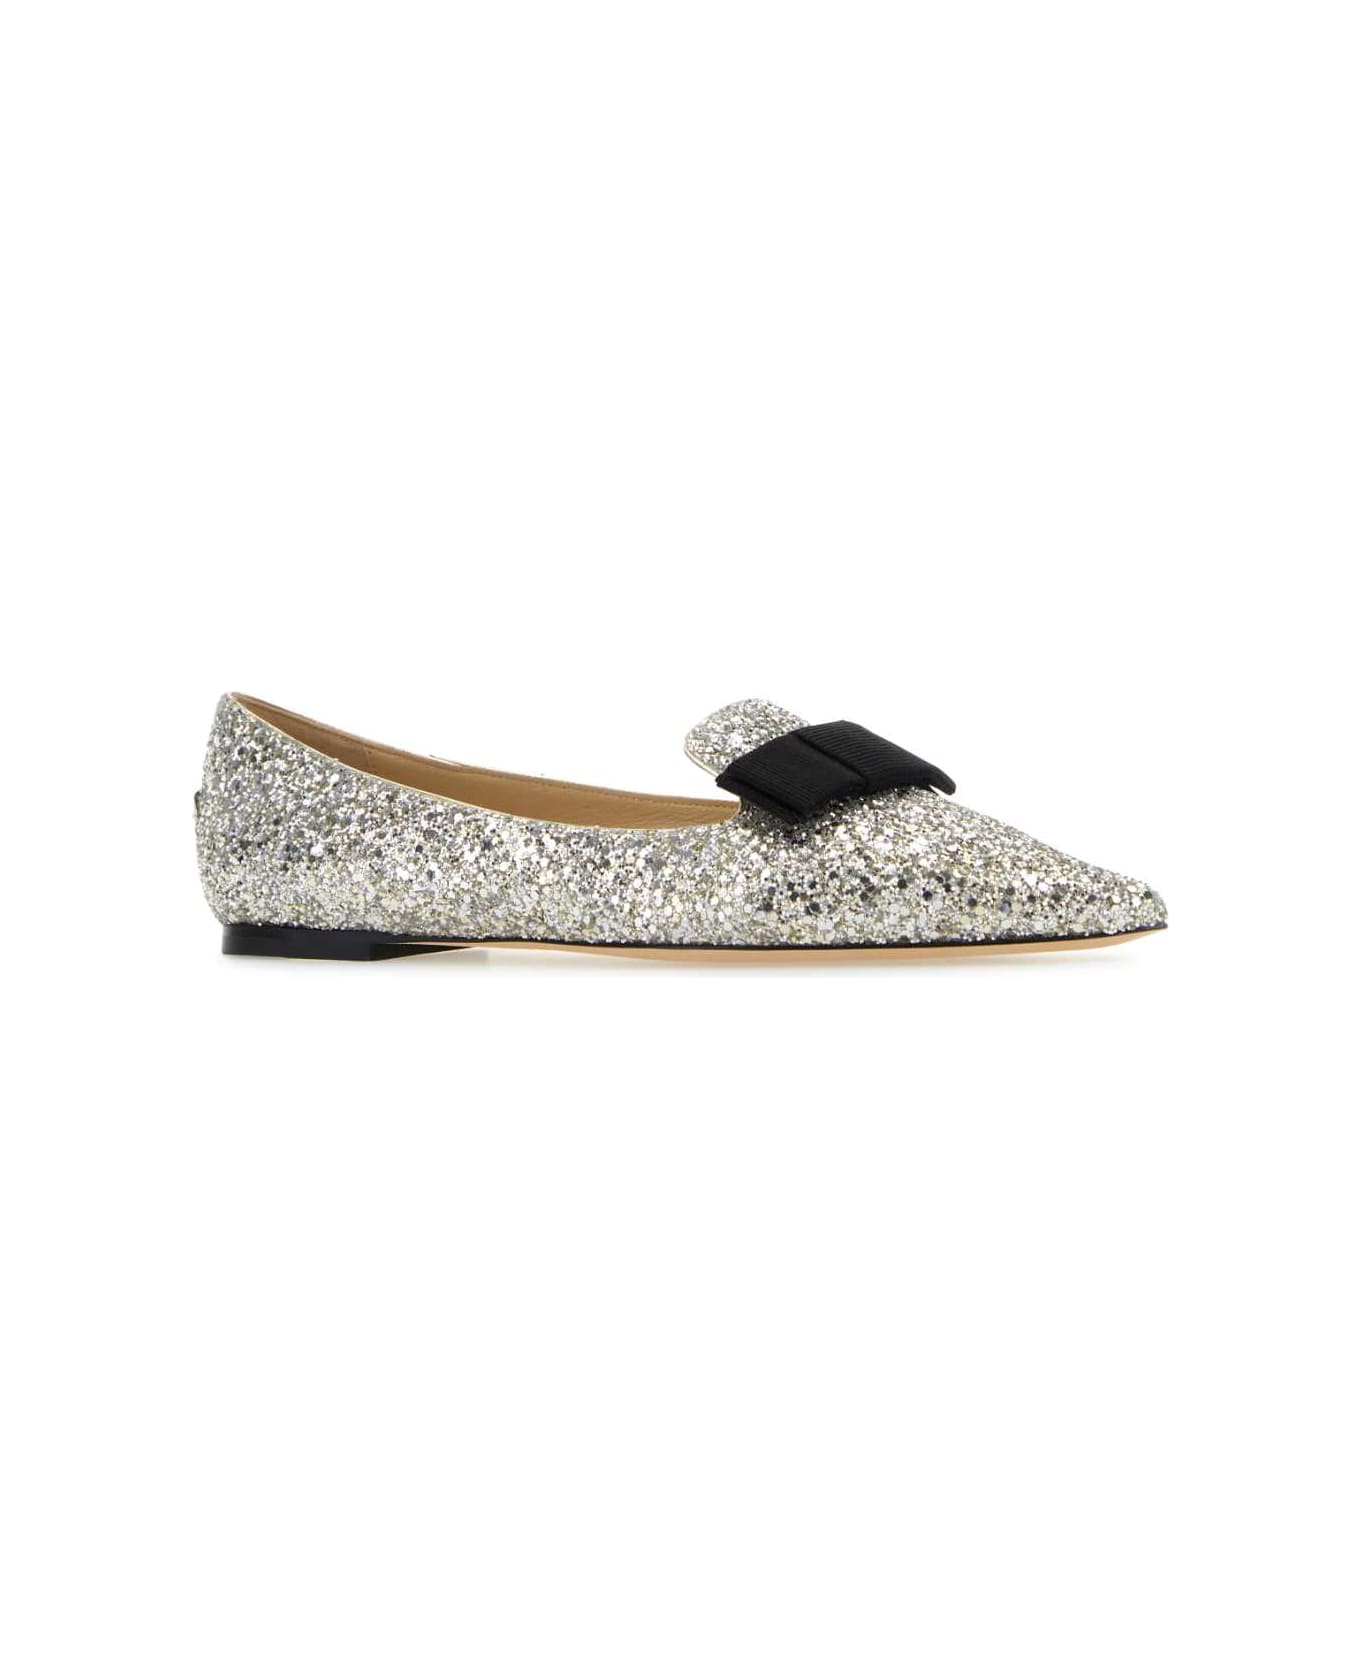 Jimmy Choo Embellished Fabric And Leather Gala Ballerinas - CHAMPAGNE フラットシューズ